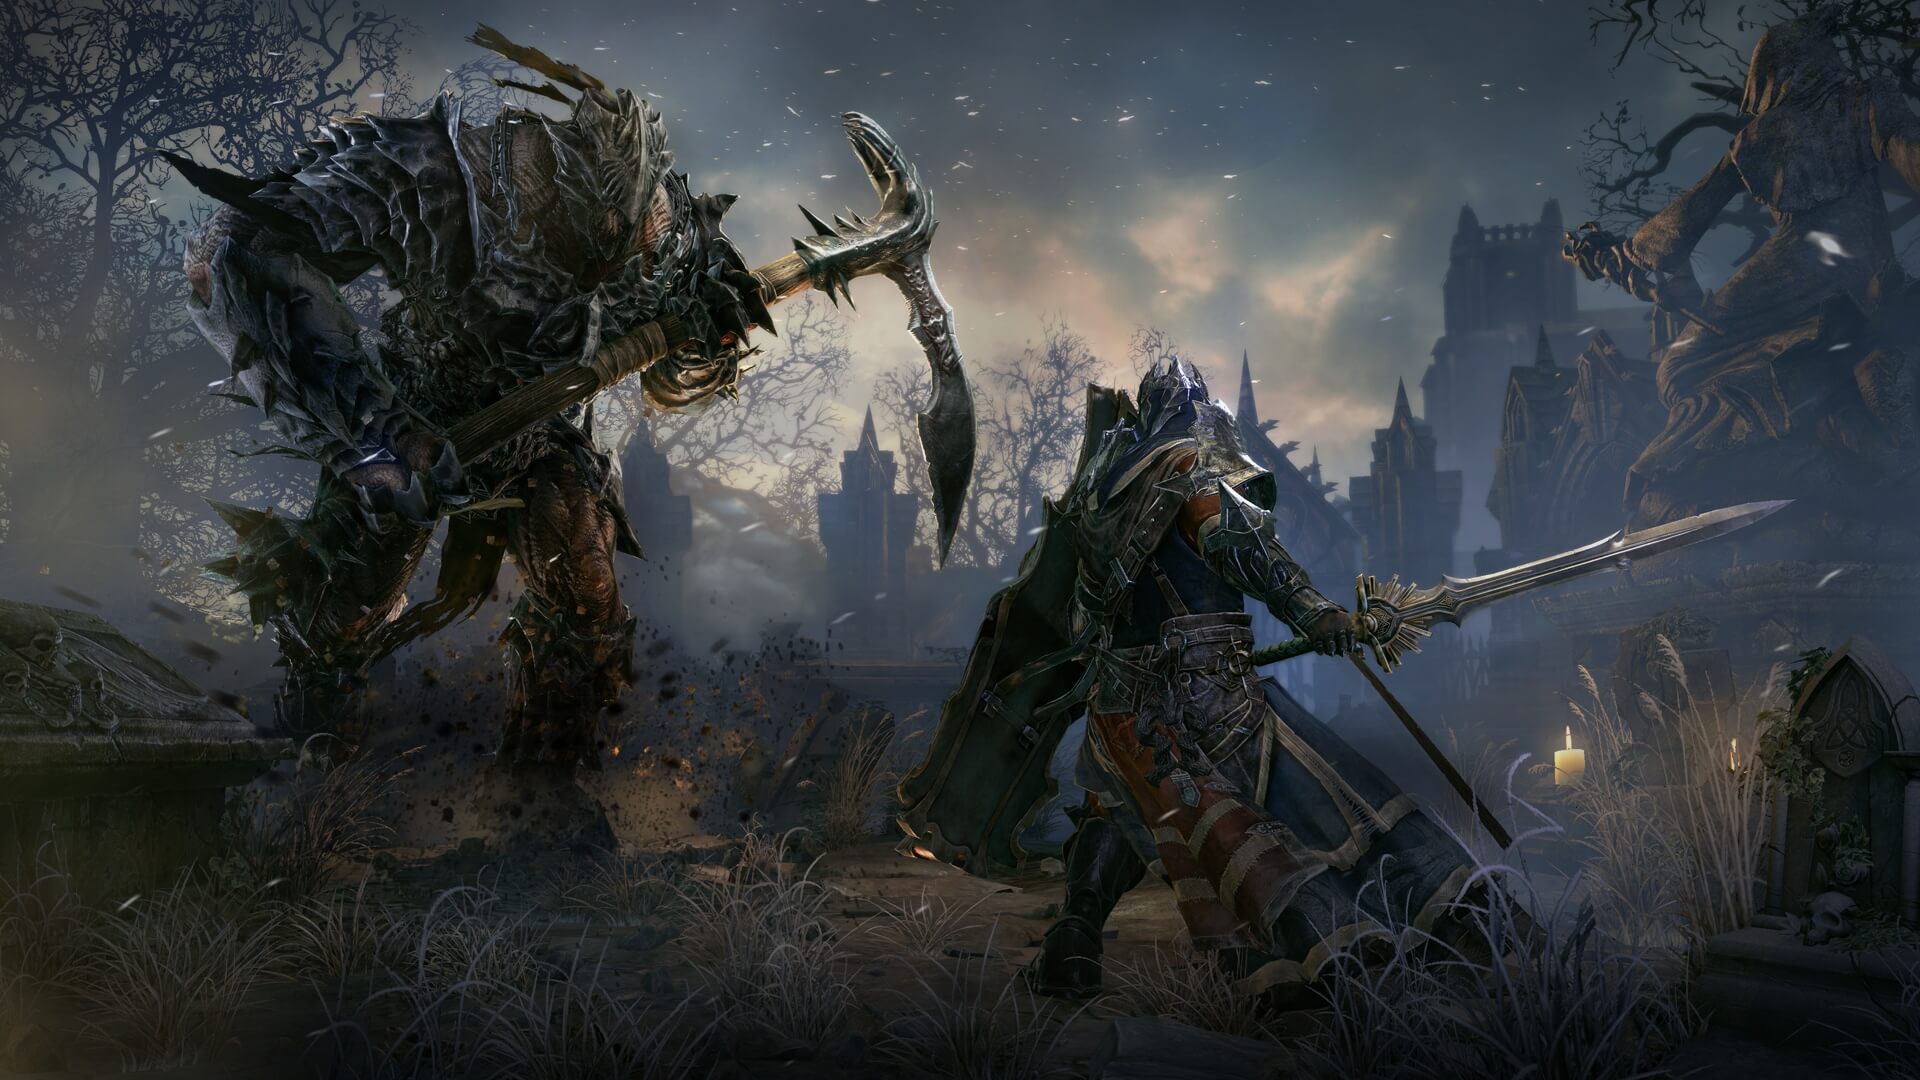 Lords Of The Fallen™ Game of the Year Edition